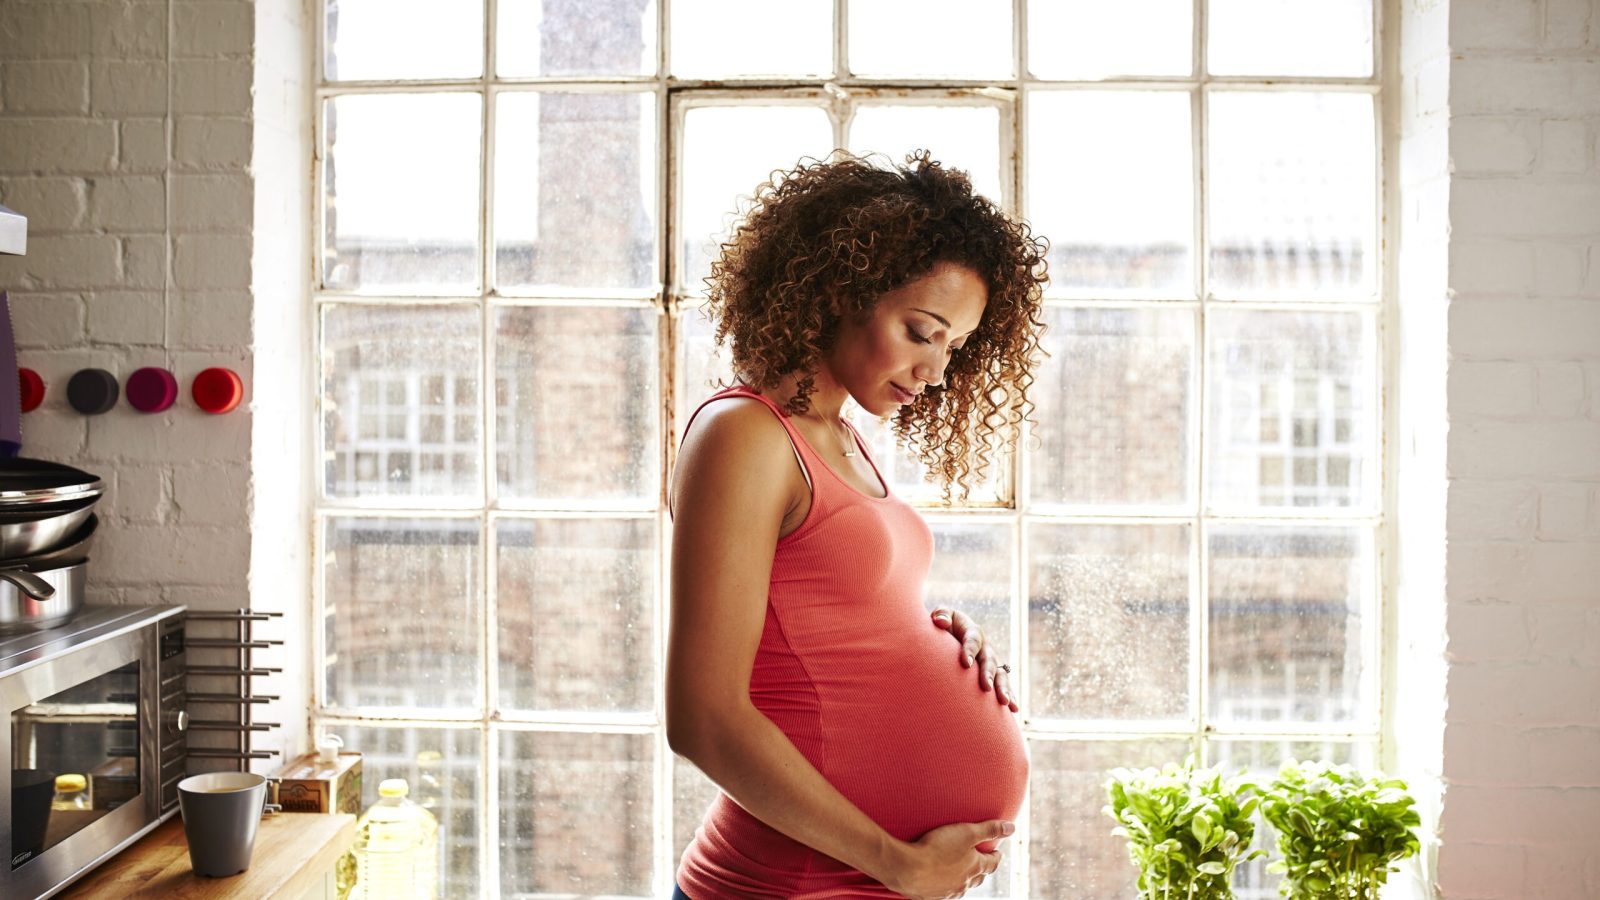 A pregnant woman holds her bump thoughtfully in her modern kitchen window on a sunny day